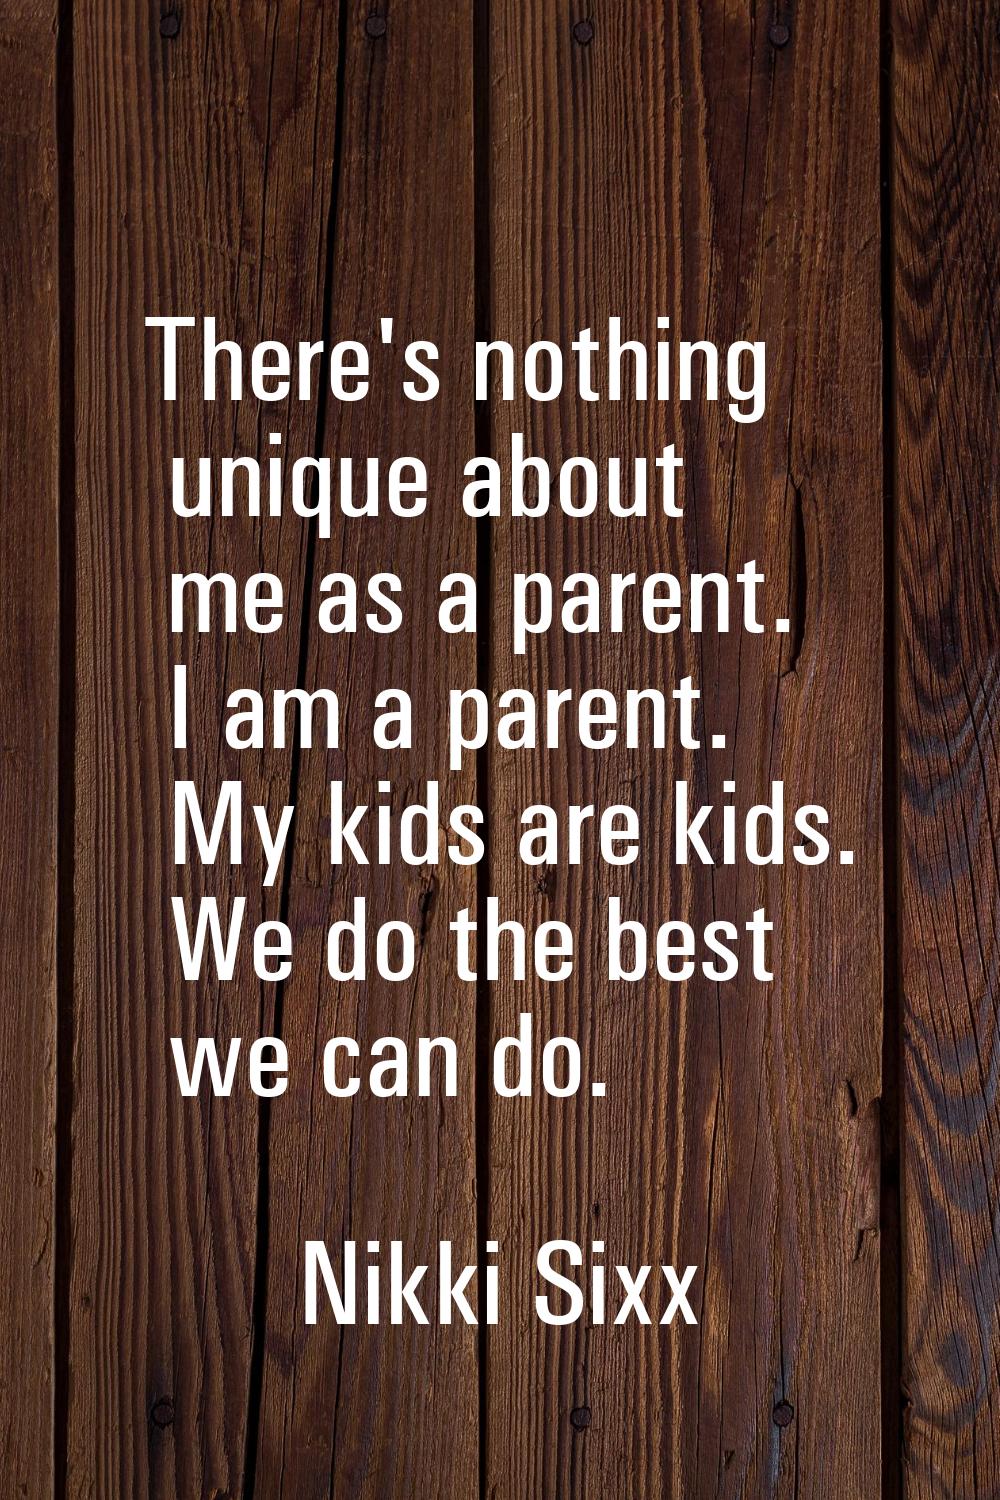 There's nothing unique about me as a parent. I am a parent. My kids are kids. We do the best we can